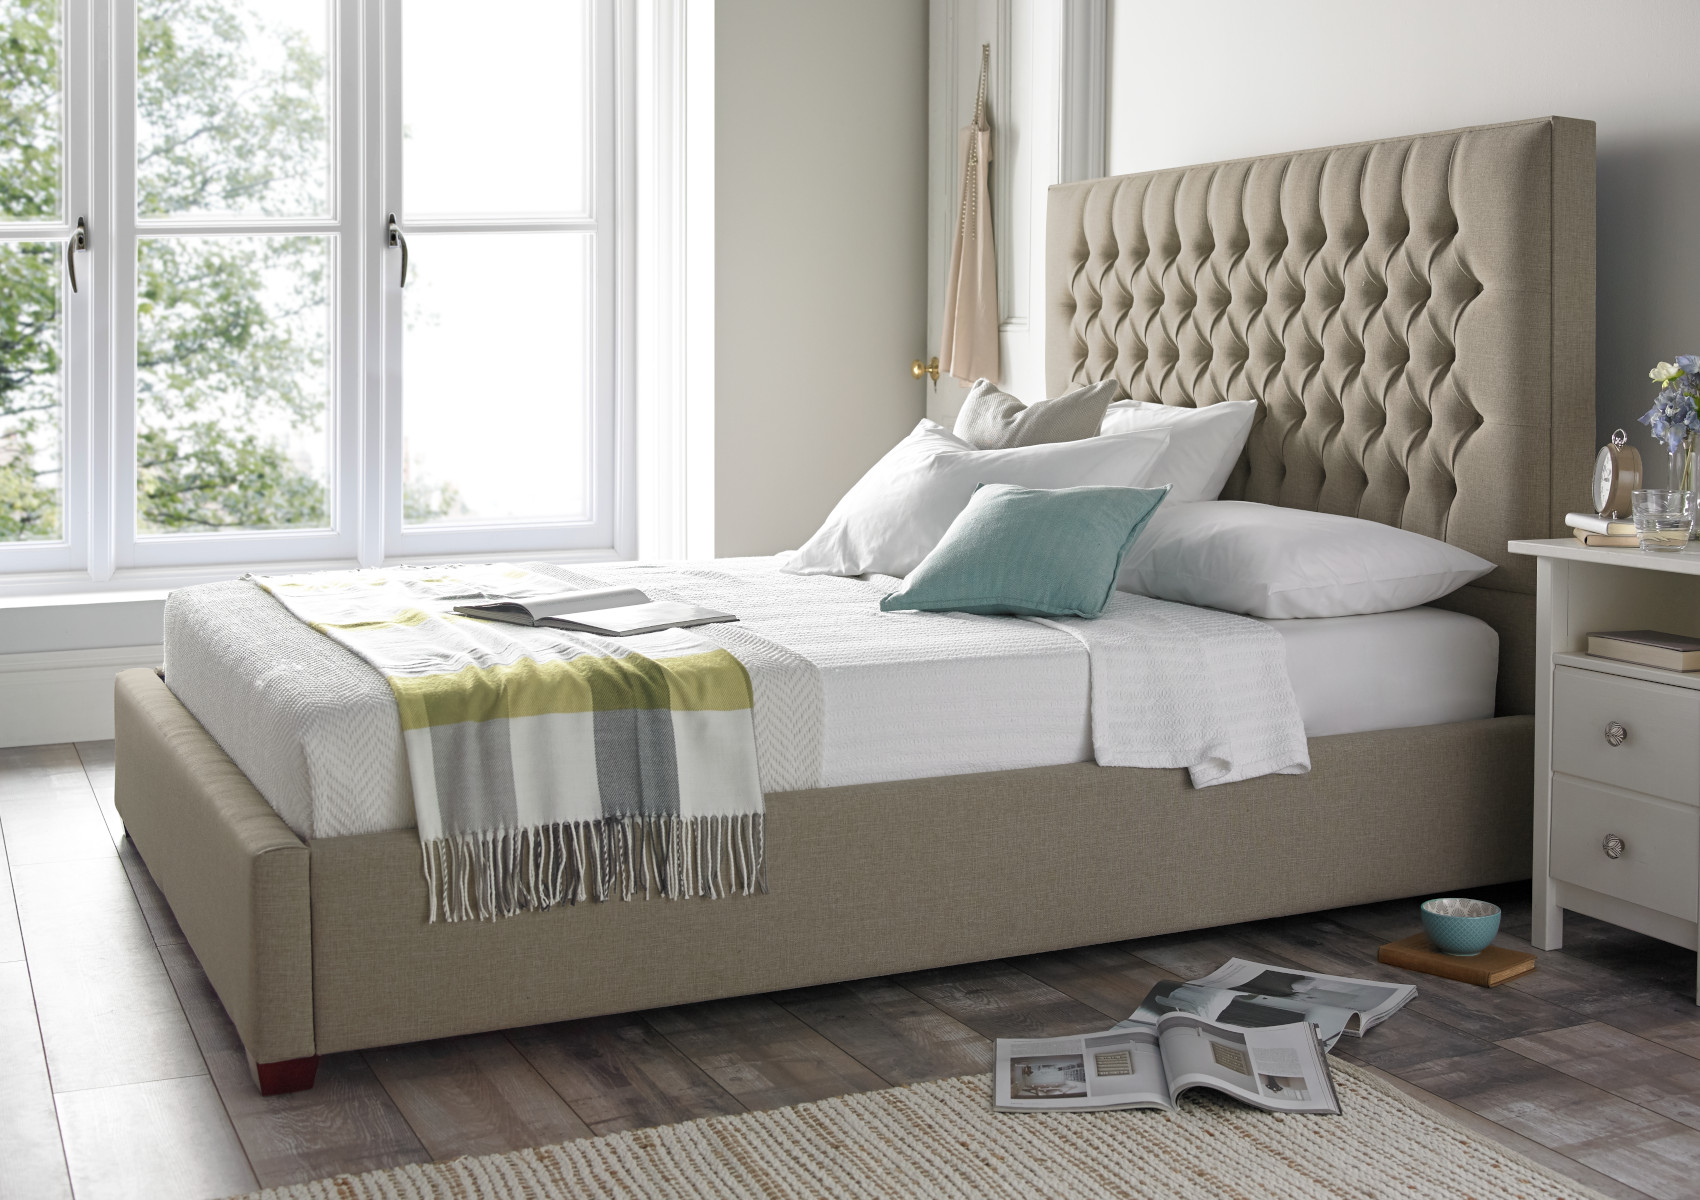 View Belgravia Naples Silver Upholstered Double Bed Time4Sleep information